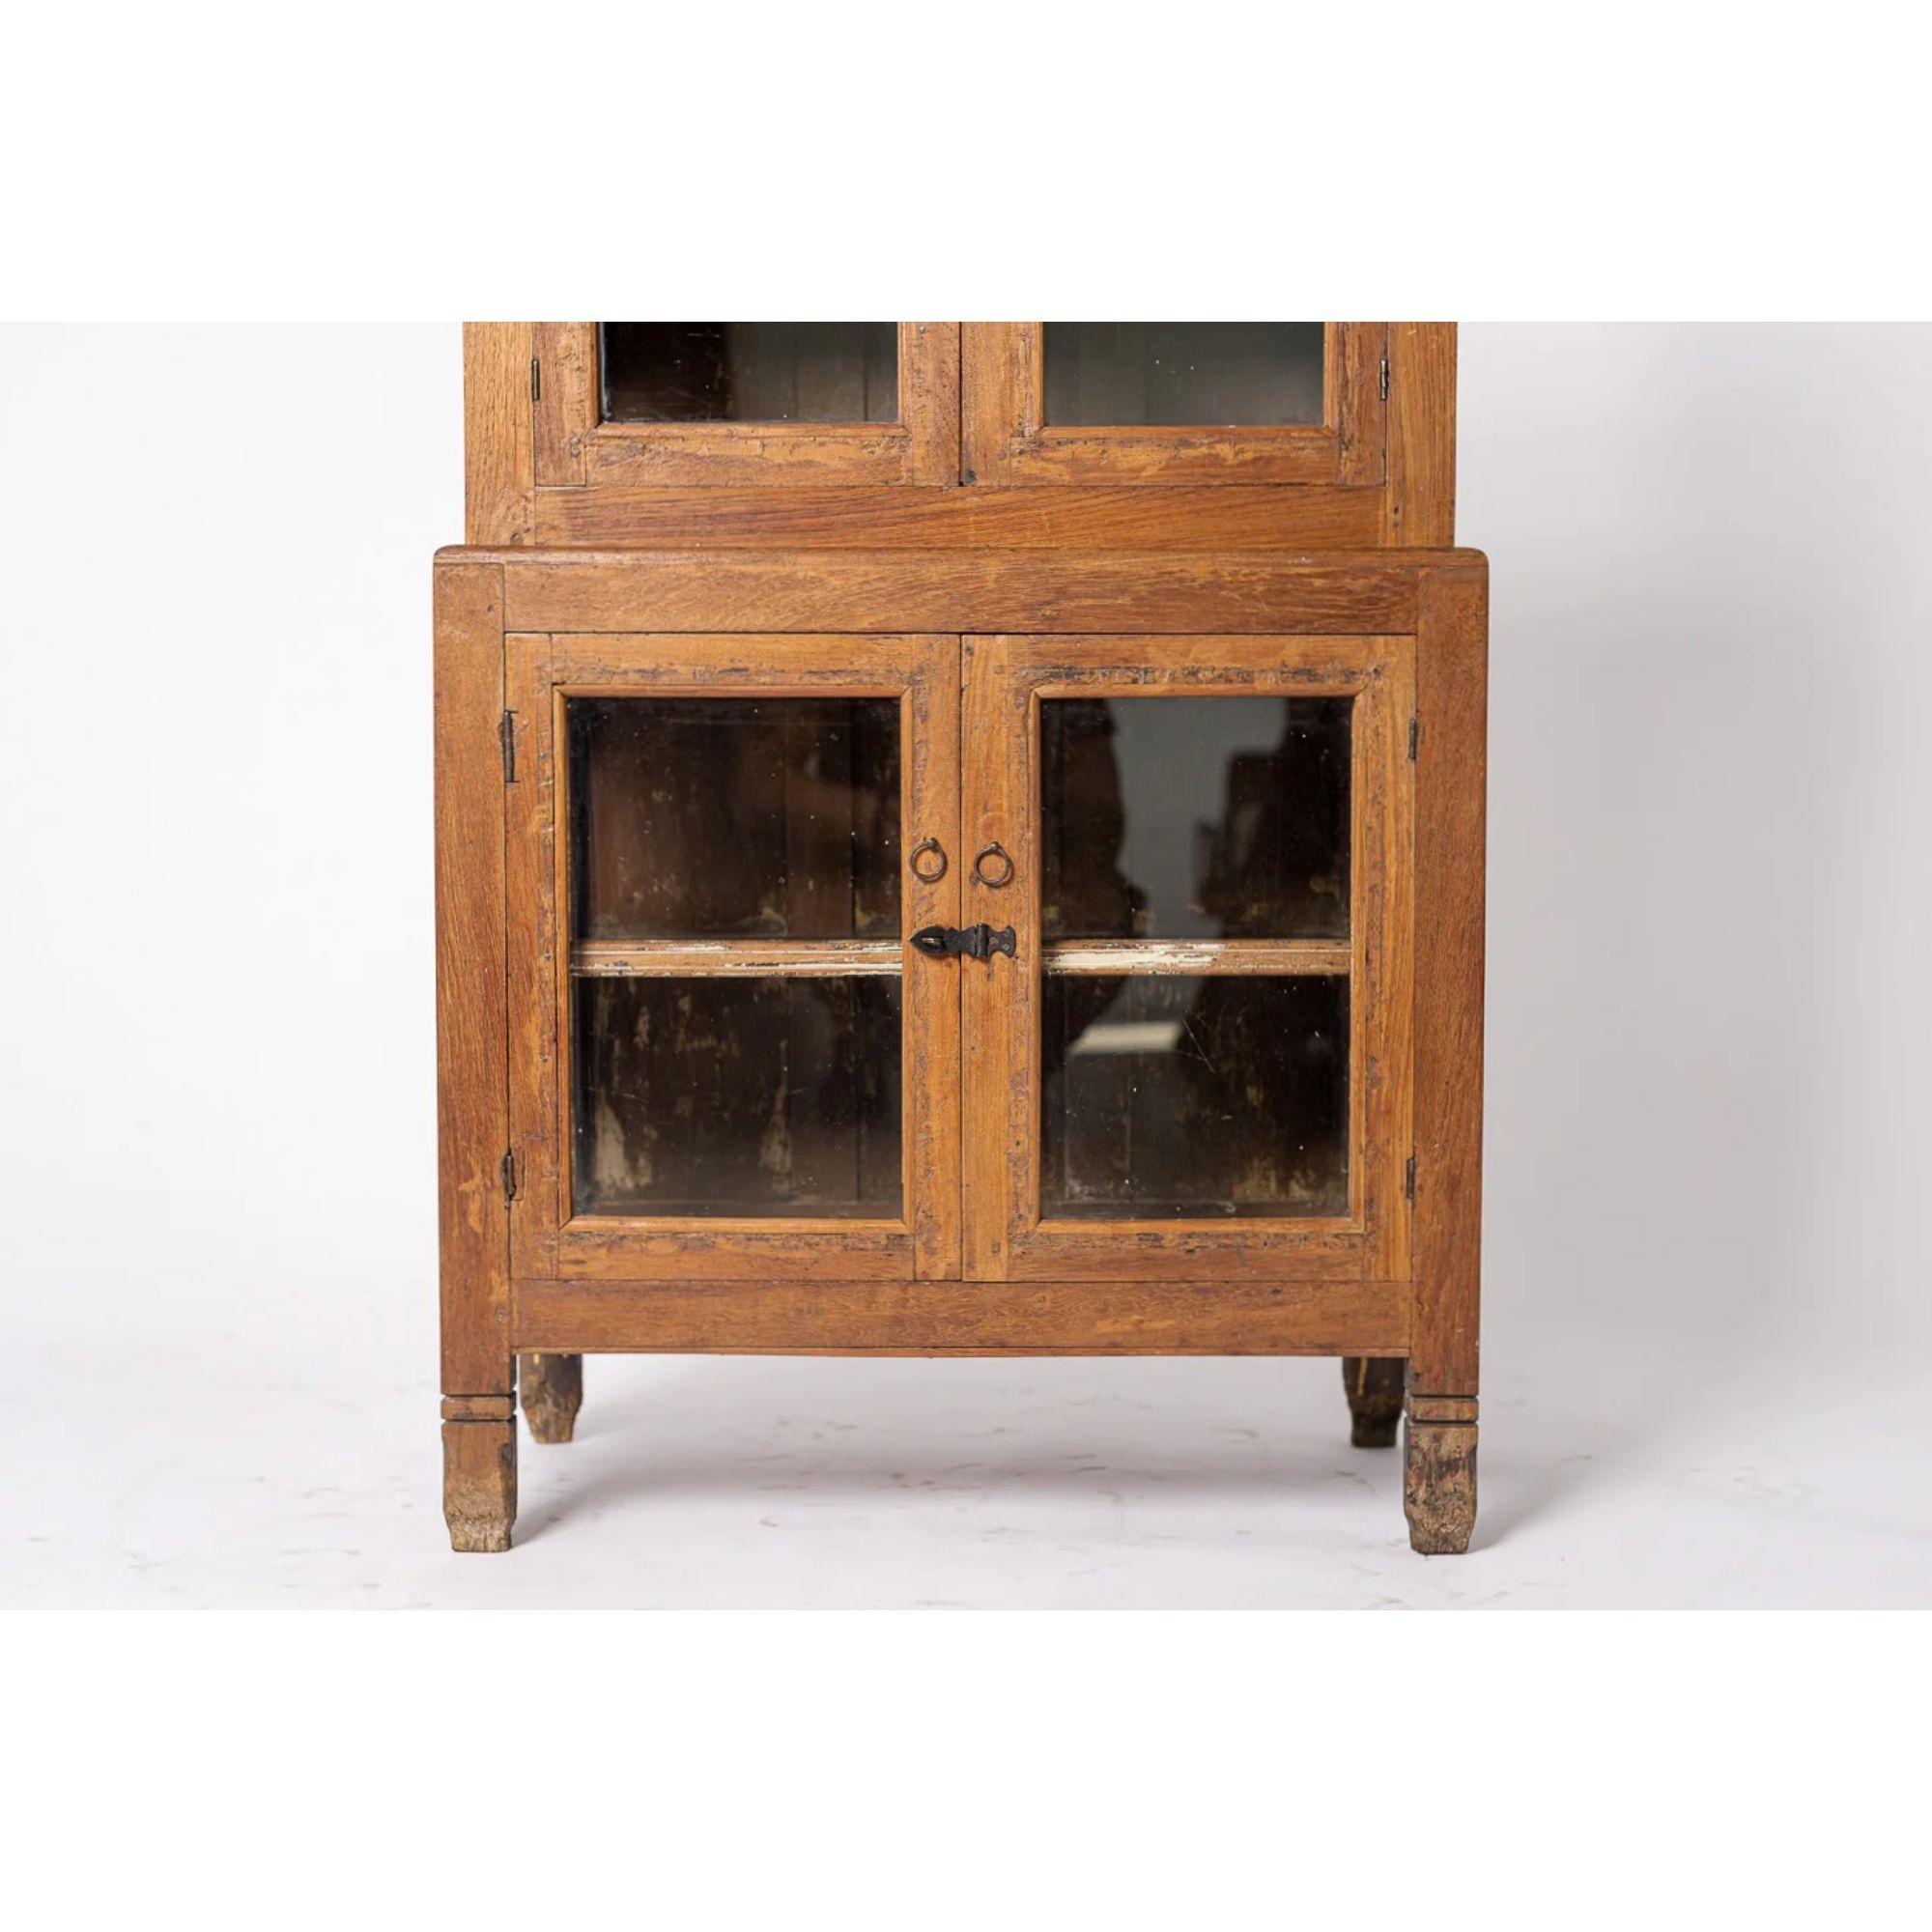 Early 20th Century Antique Portuguese Storage Cupboard Display Cabinet in Wood & Glass For Sale